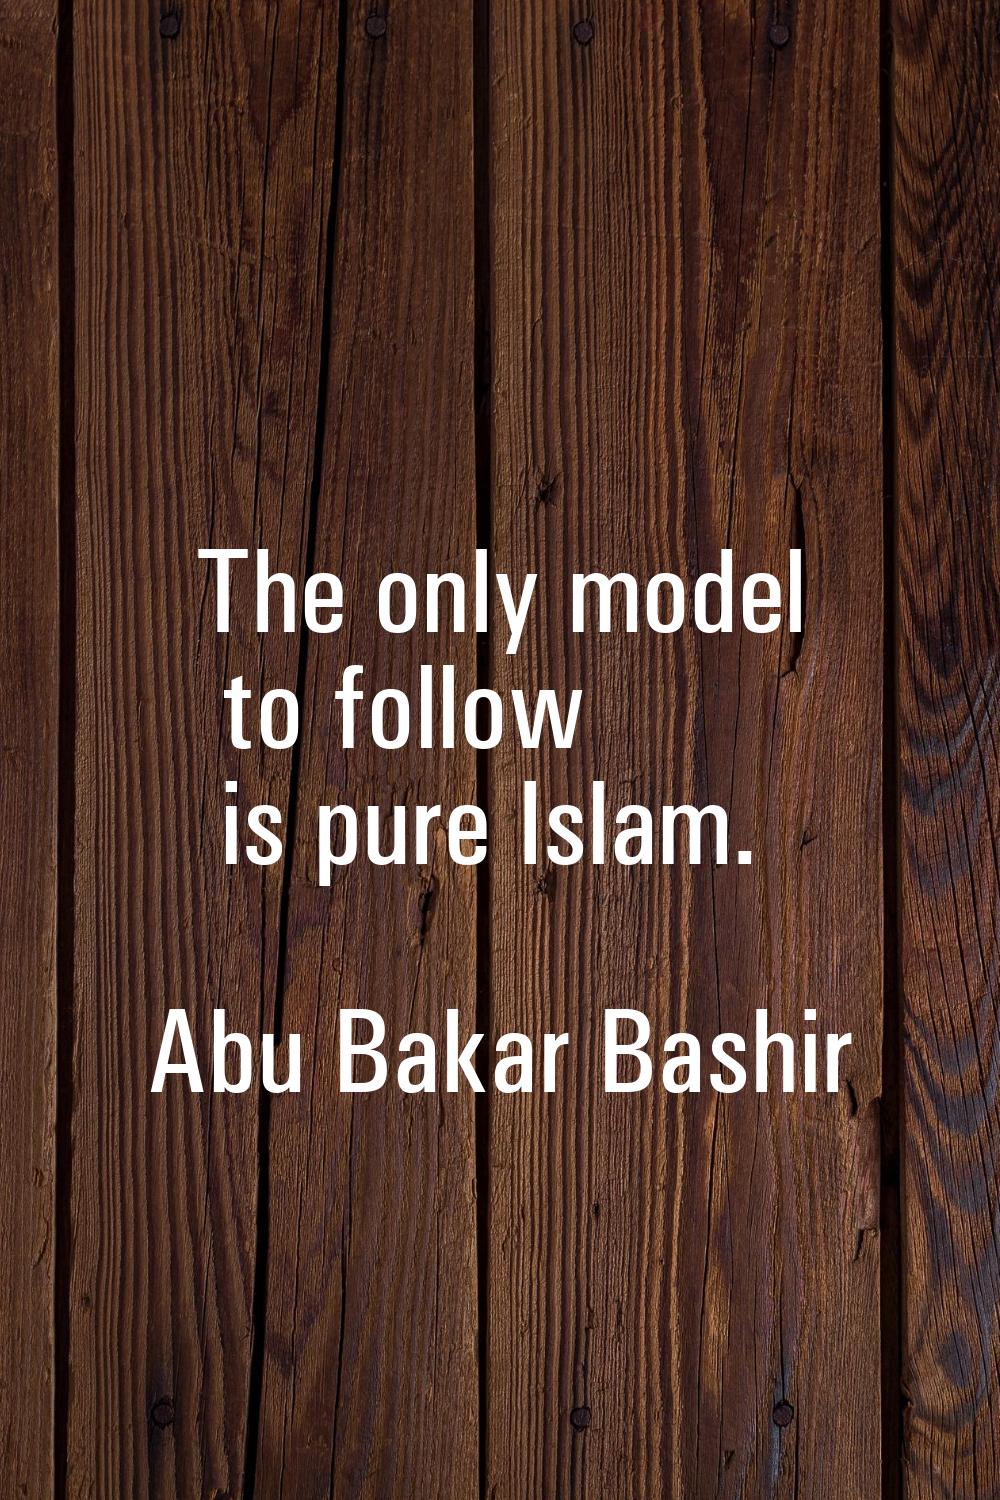 The only model to follow is pure Islam.